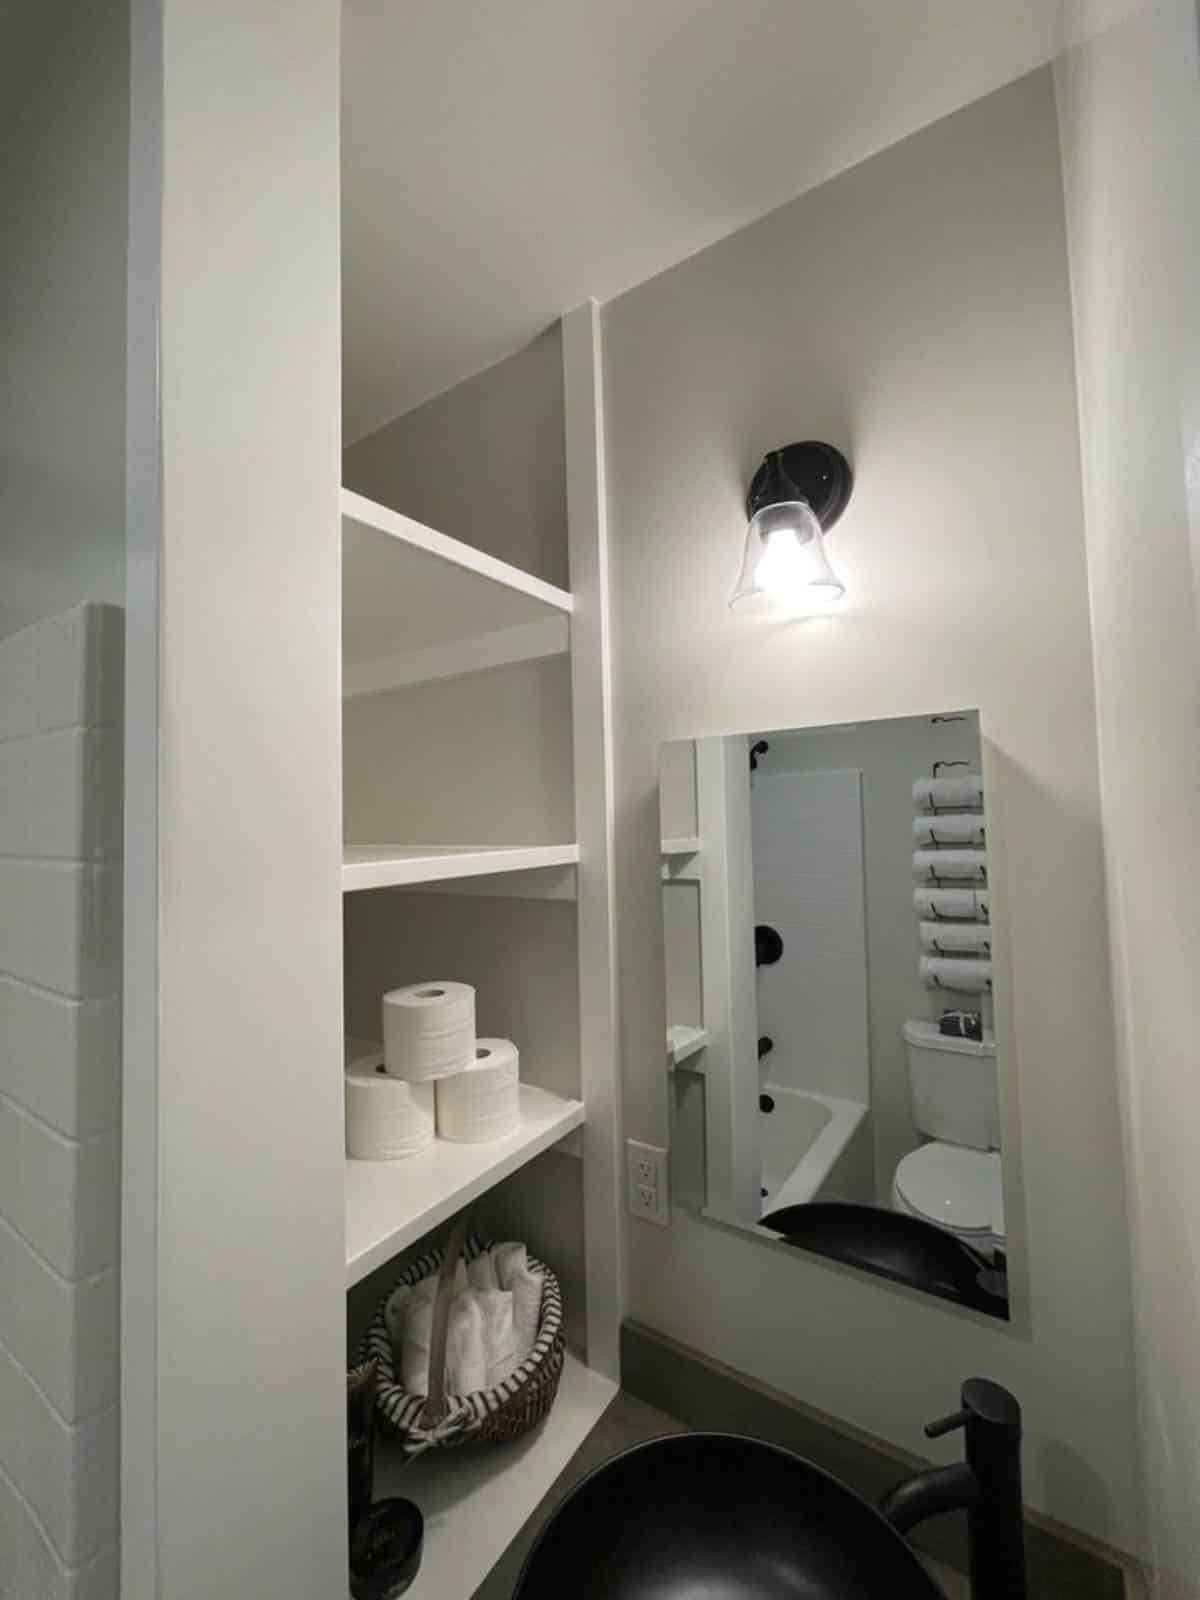 all standard fitting sin the bathroom of custom container home